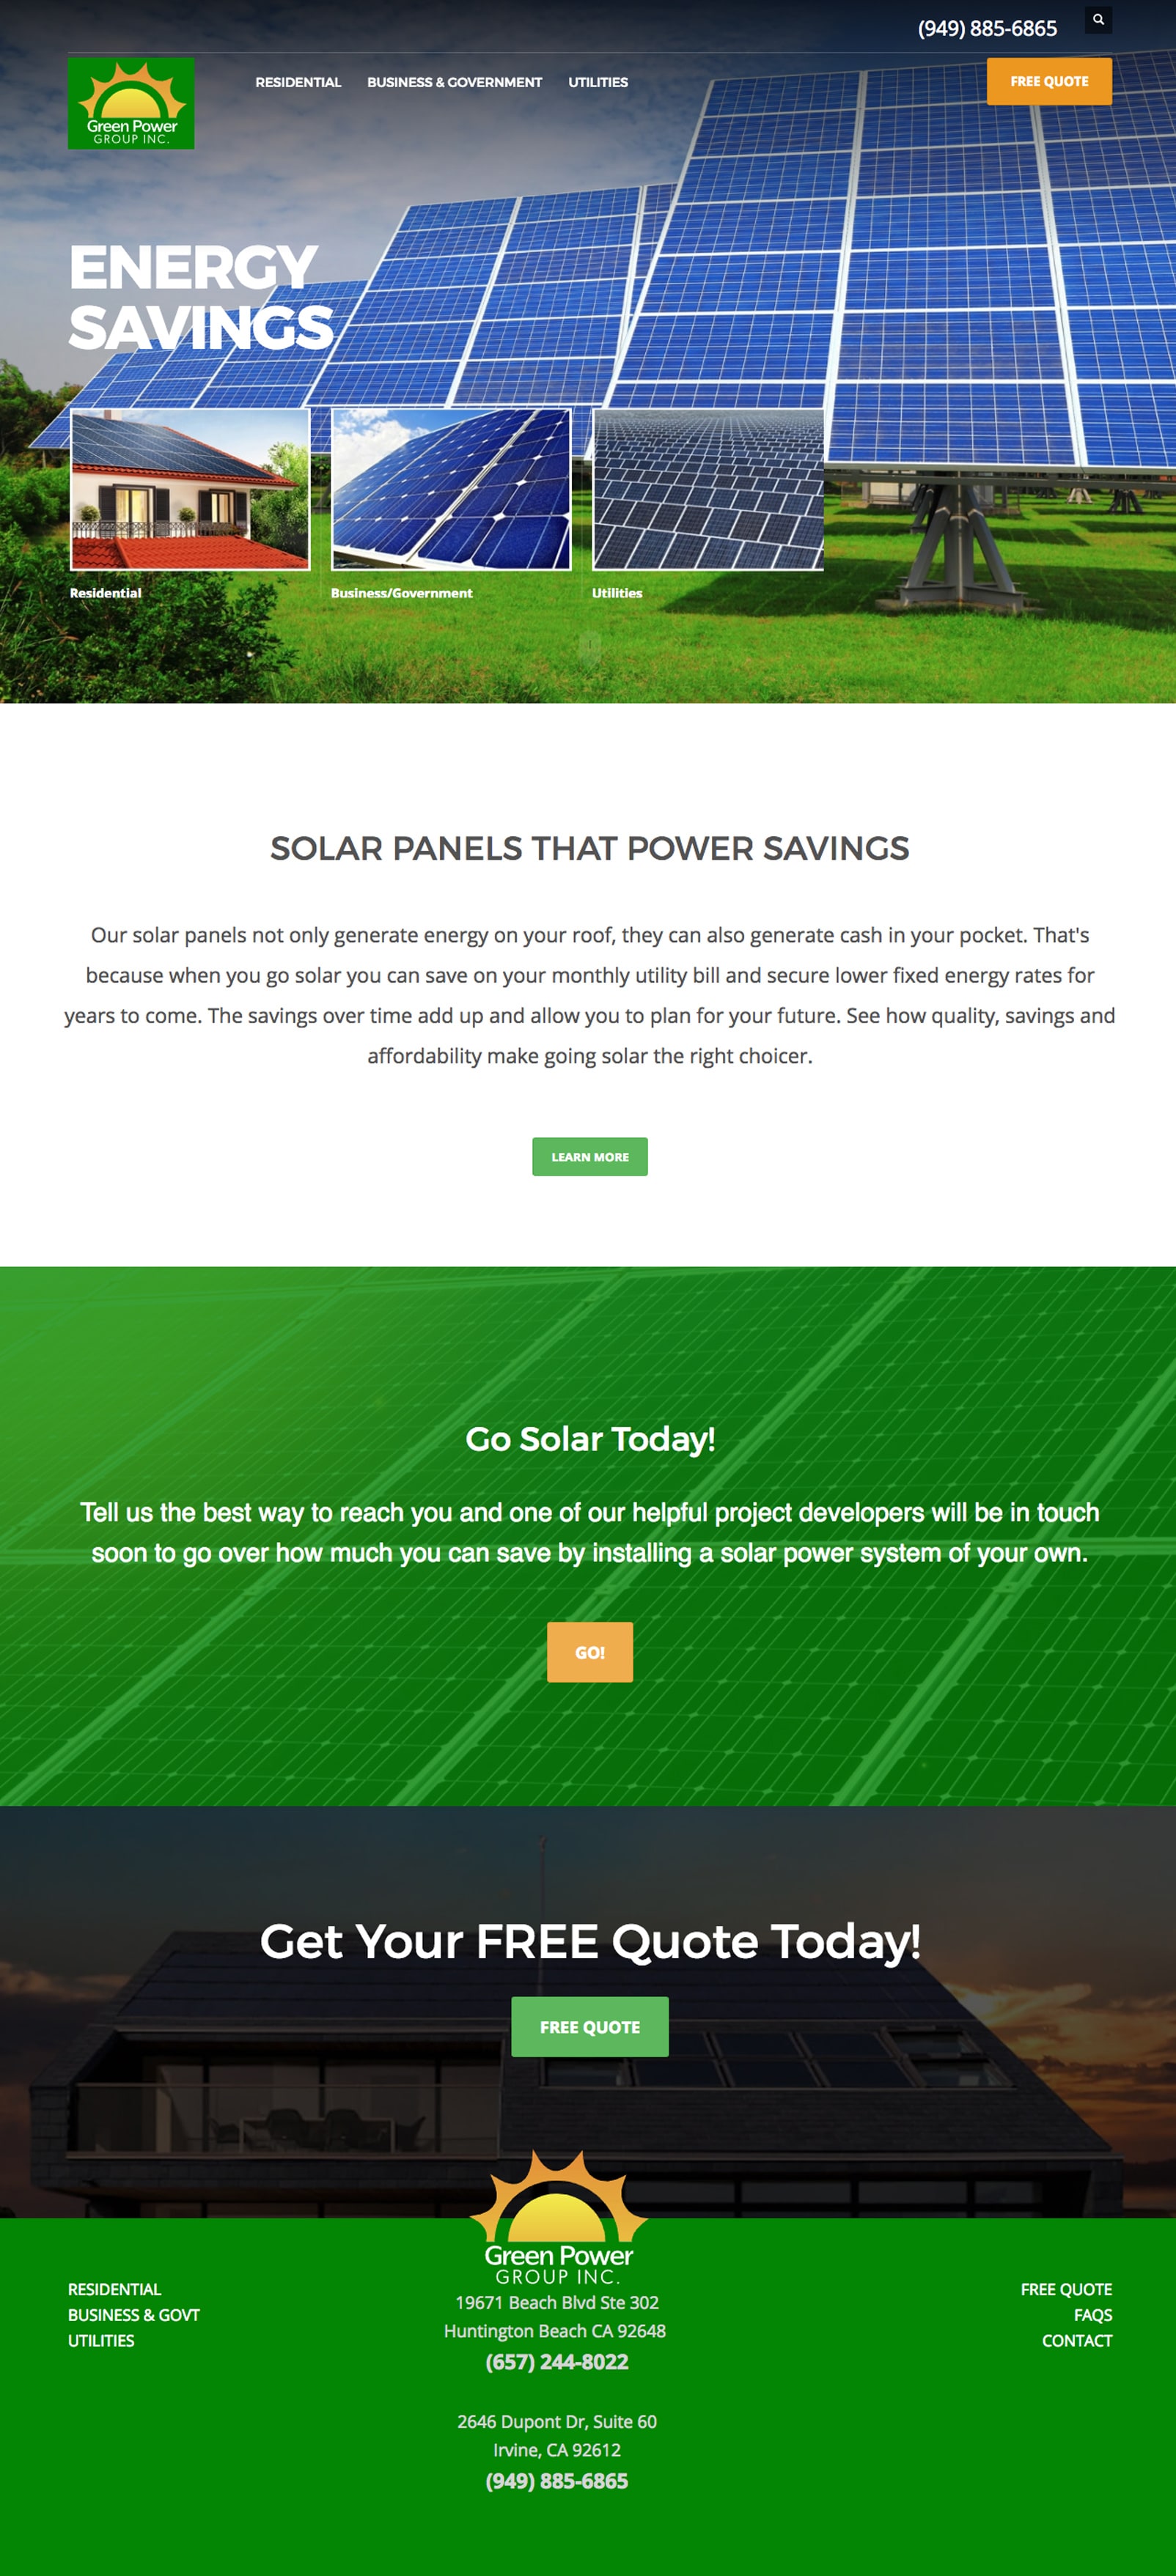 Green Power Group home page